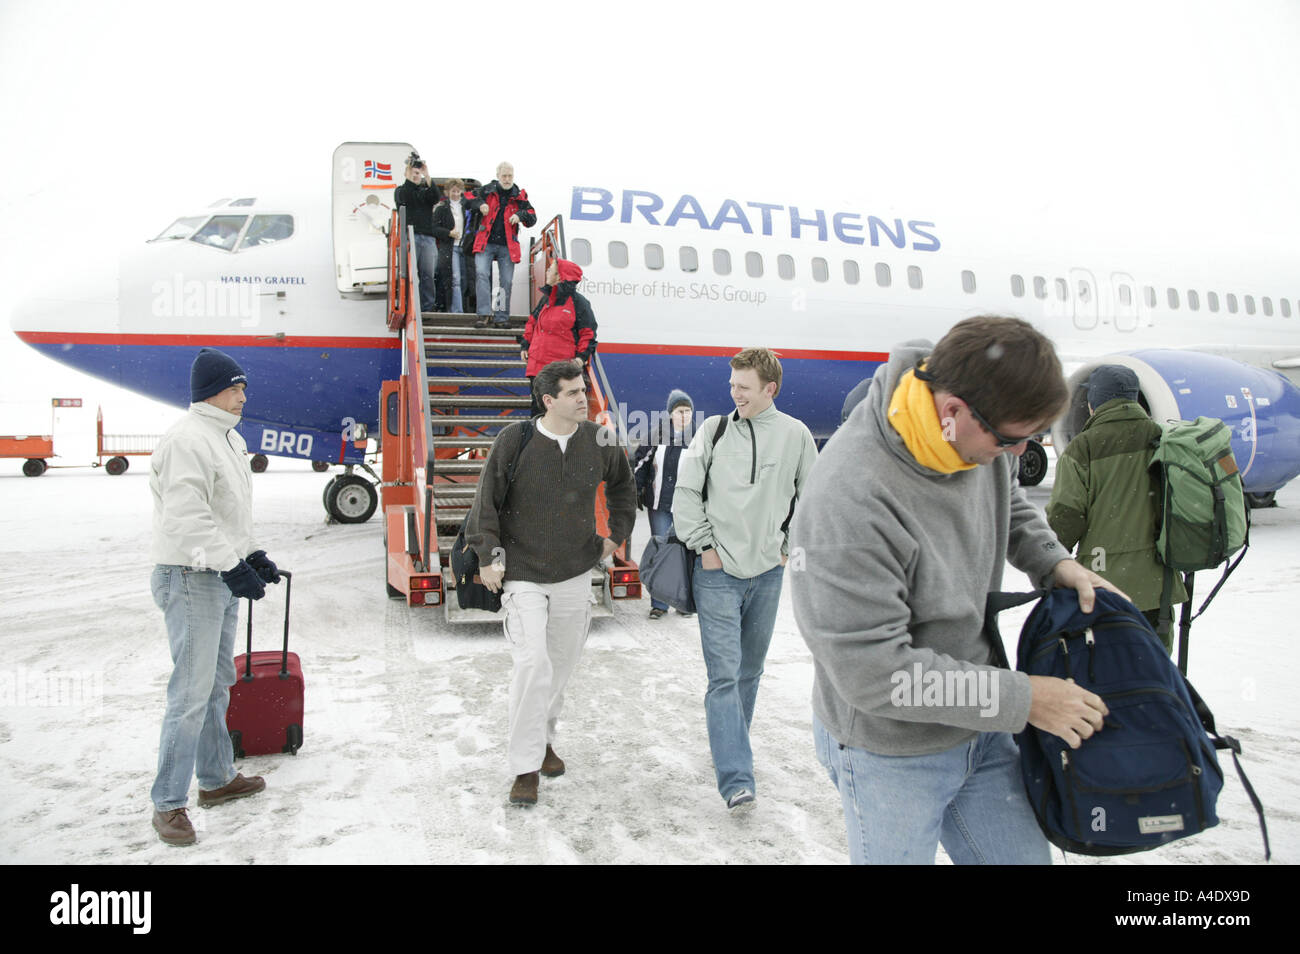 Competitors arriving by air for the 2004 Drambuie ice golf championship in Svalbard, Norway. Stock Photo